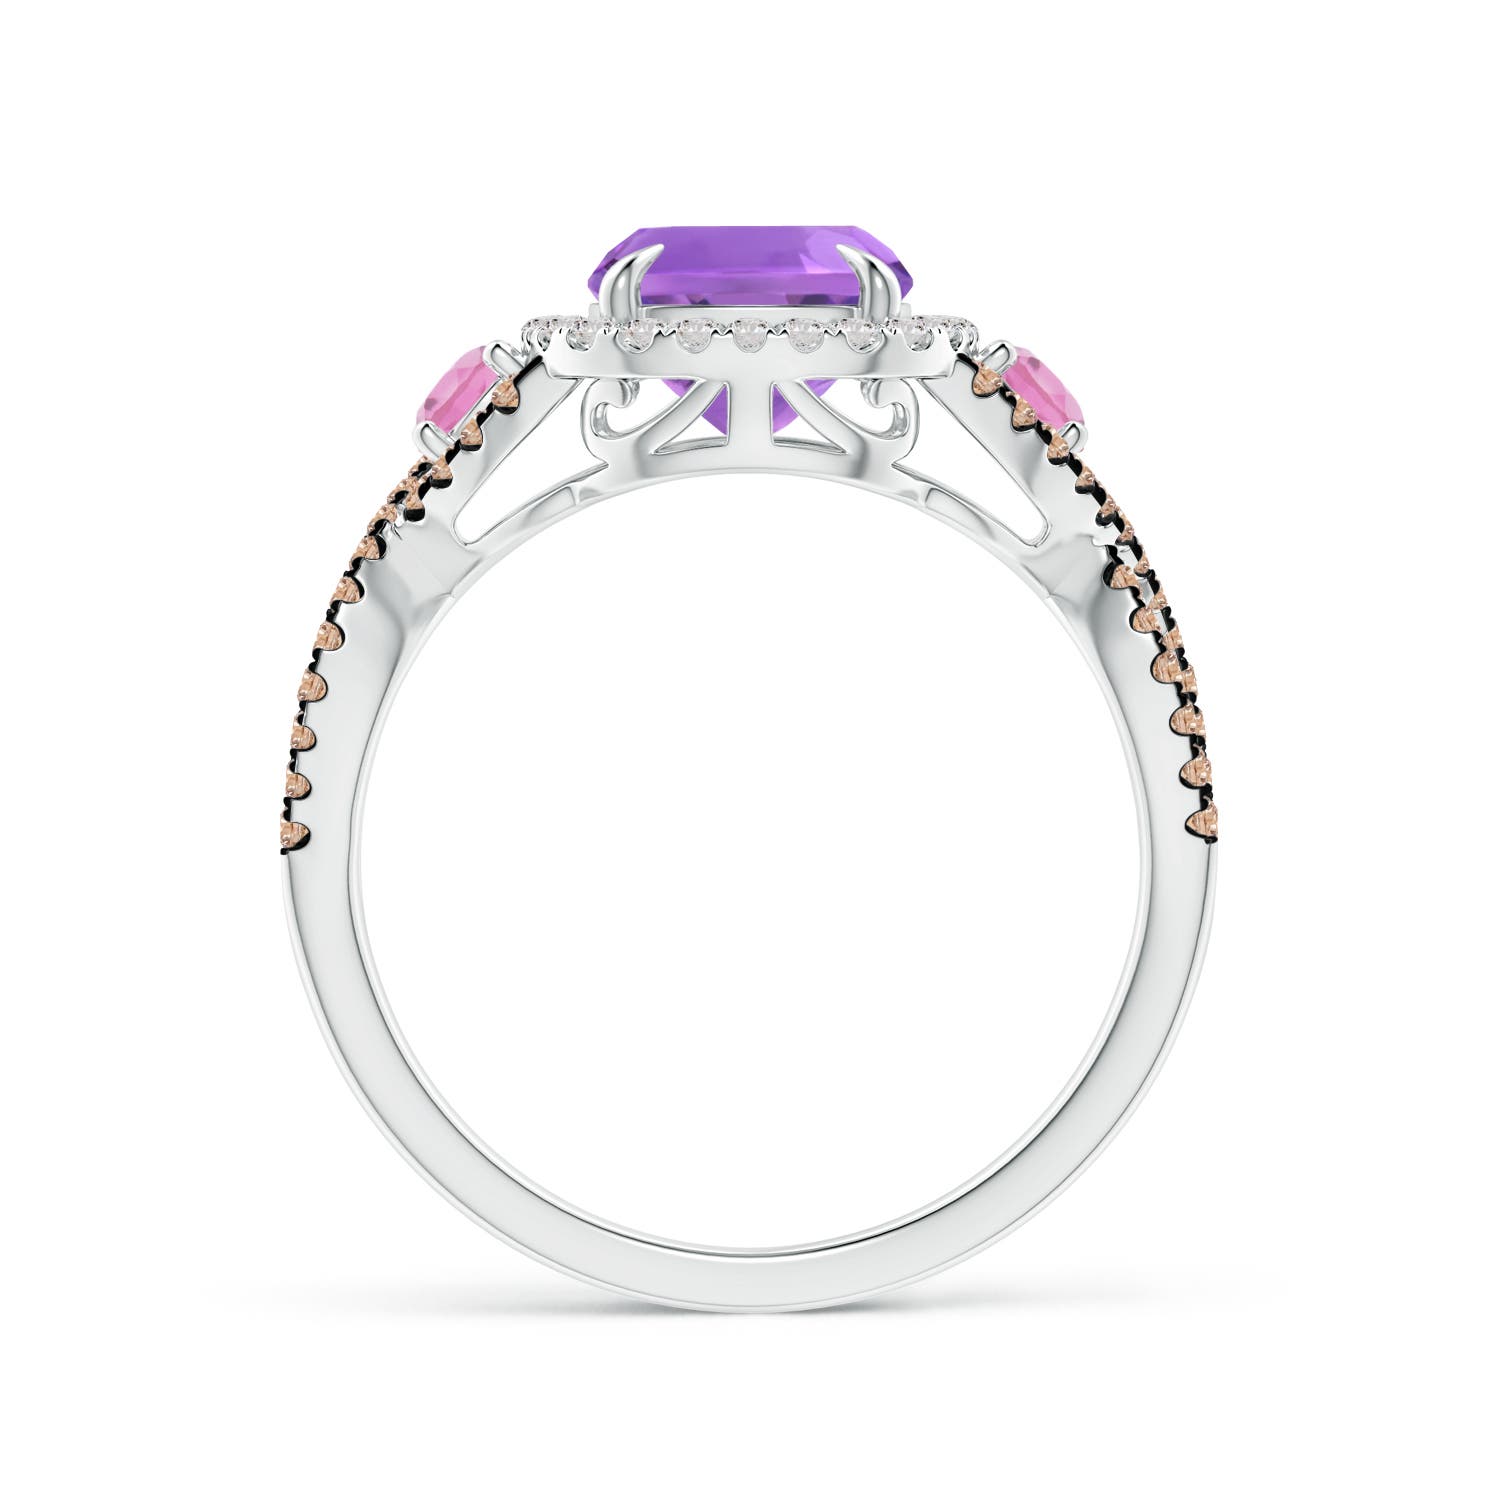 AA - Amethyst / 2.59 CT / 14 KT White Gold